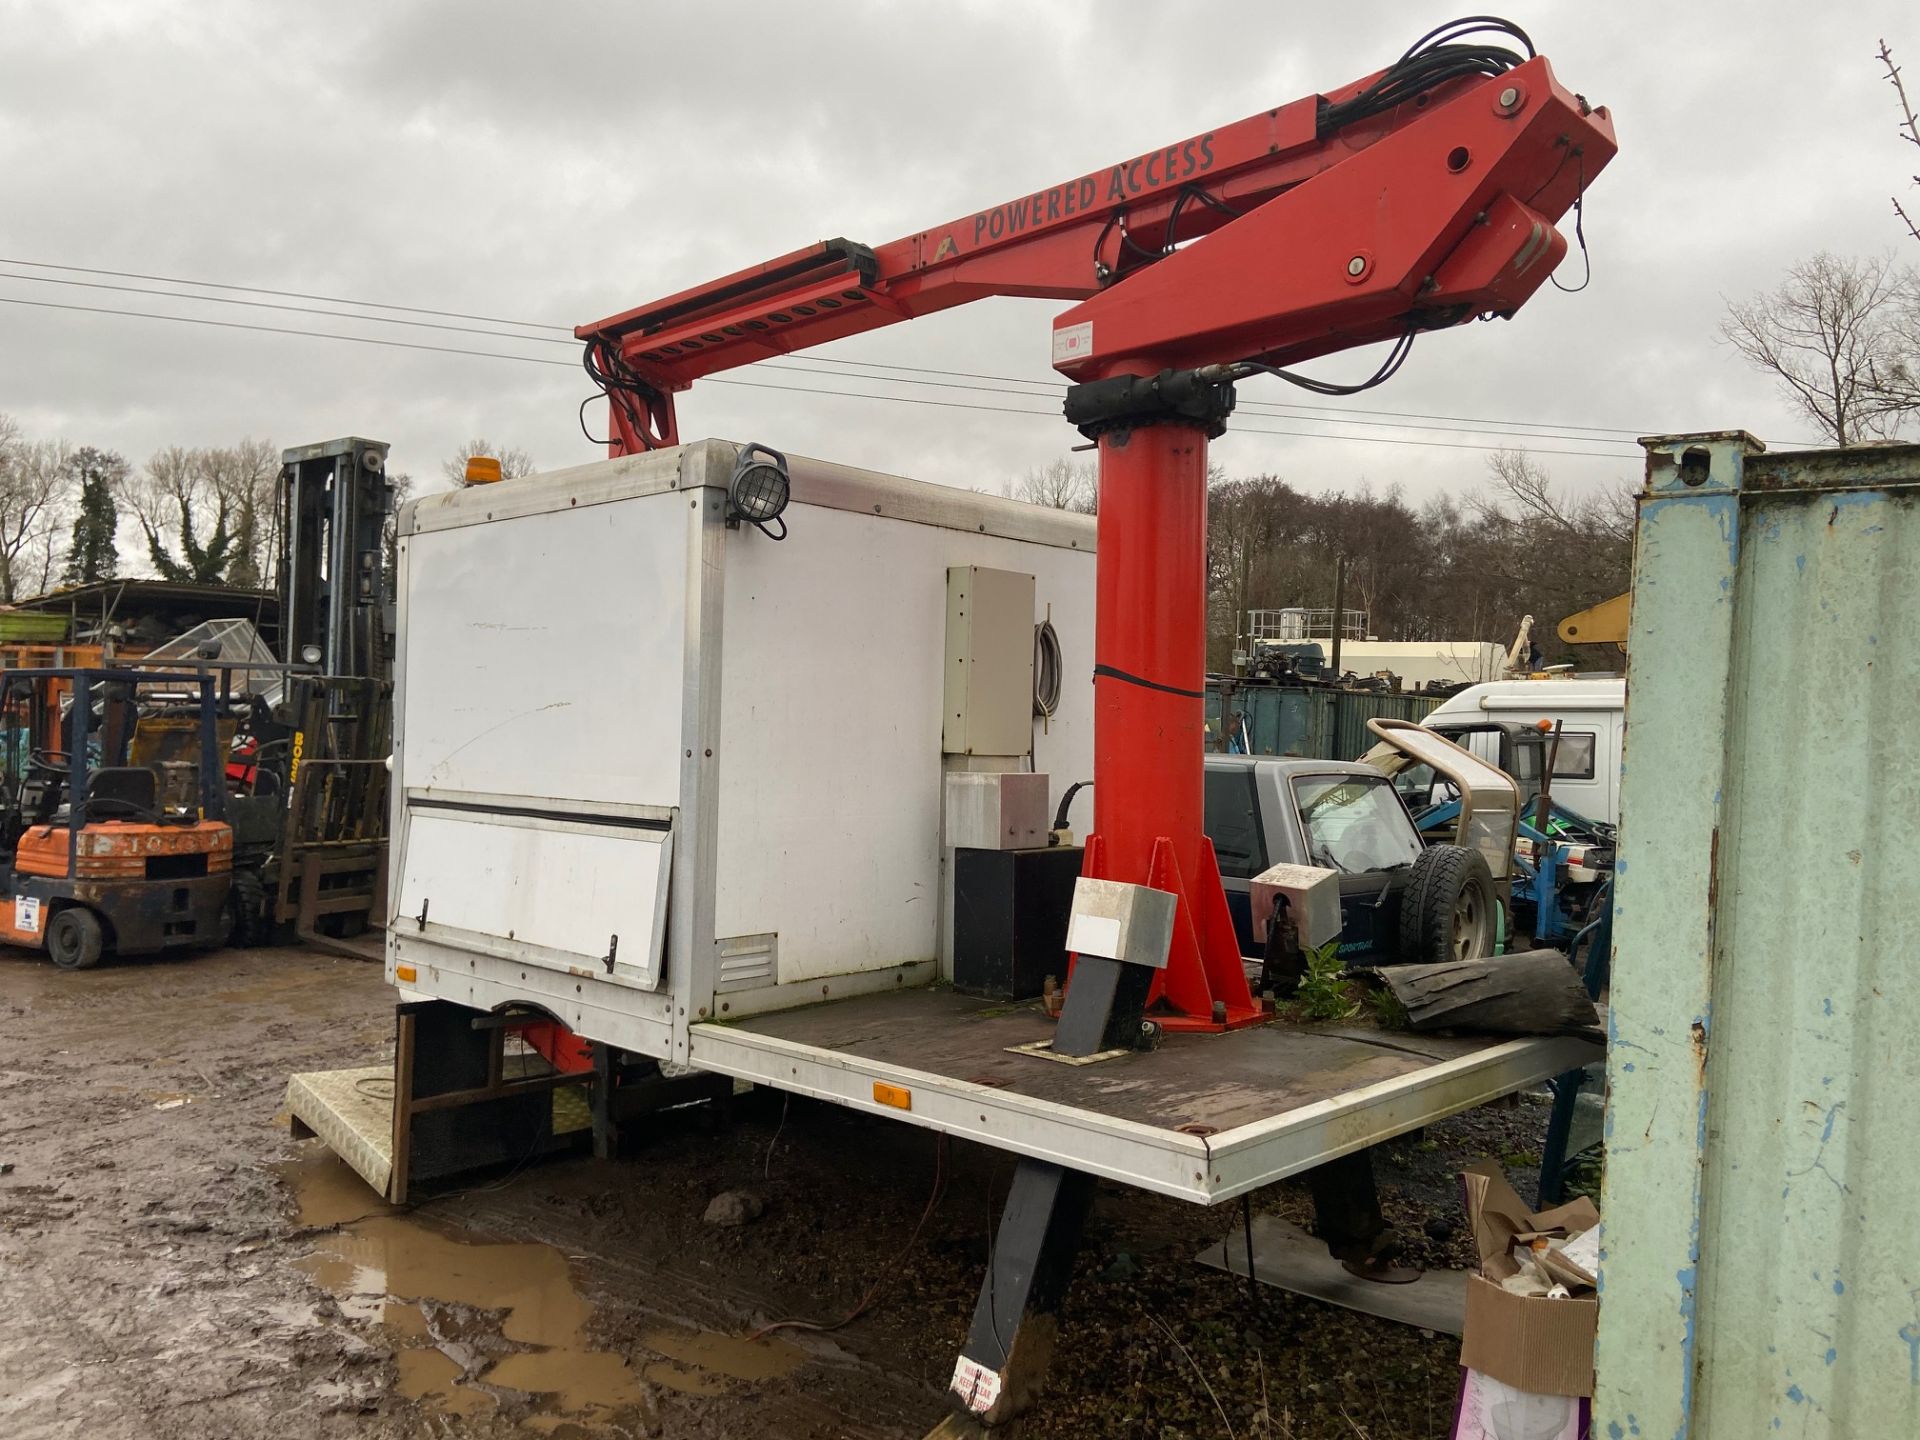 2009 POWER ACCESS PA145 14.5 METER CHERRY PICKER, SELF CONTAINED SO RUNS OFF 24V *PLUS VAT* - Image 4 of 7